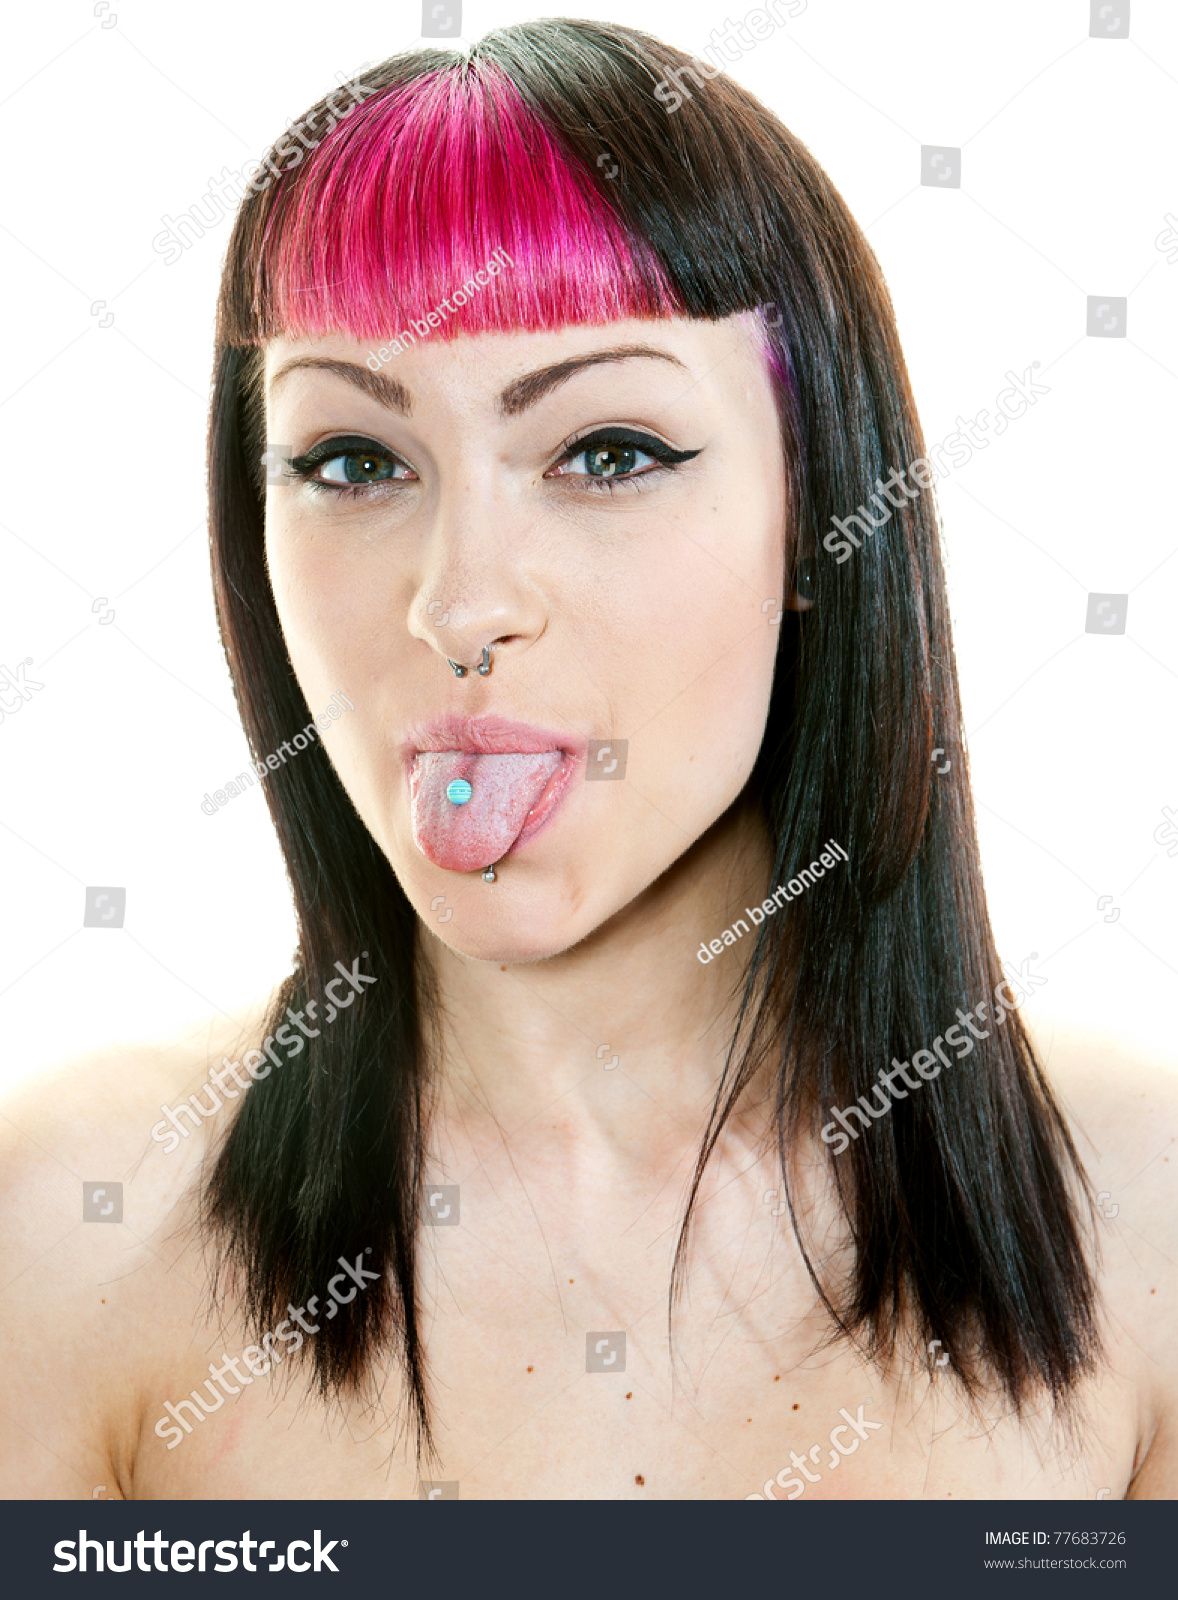 Teen Girl With Interesting Hair Style And Piercing